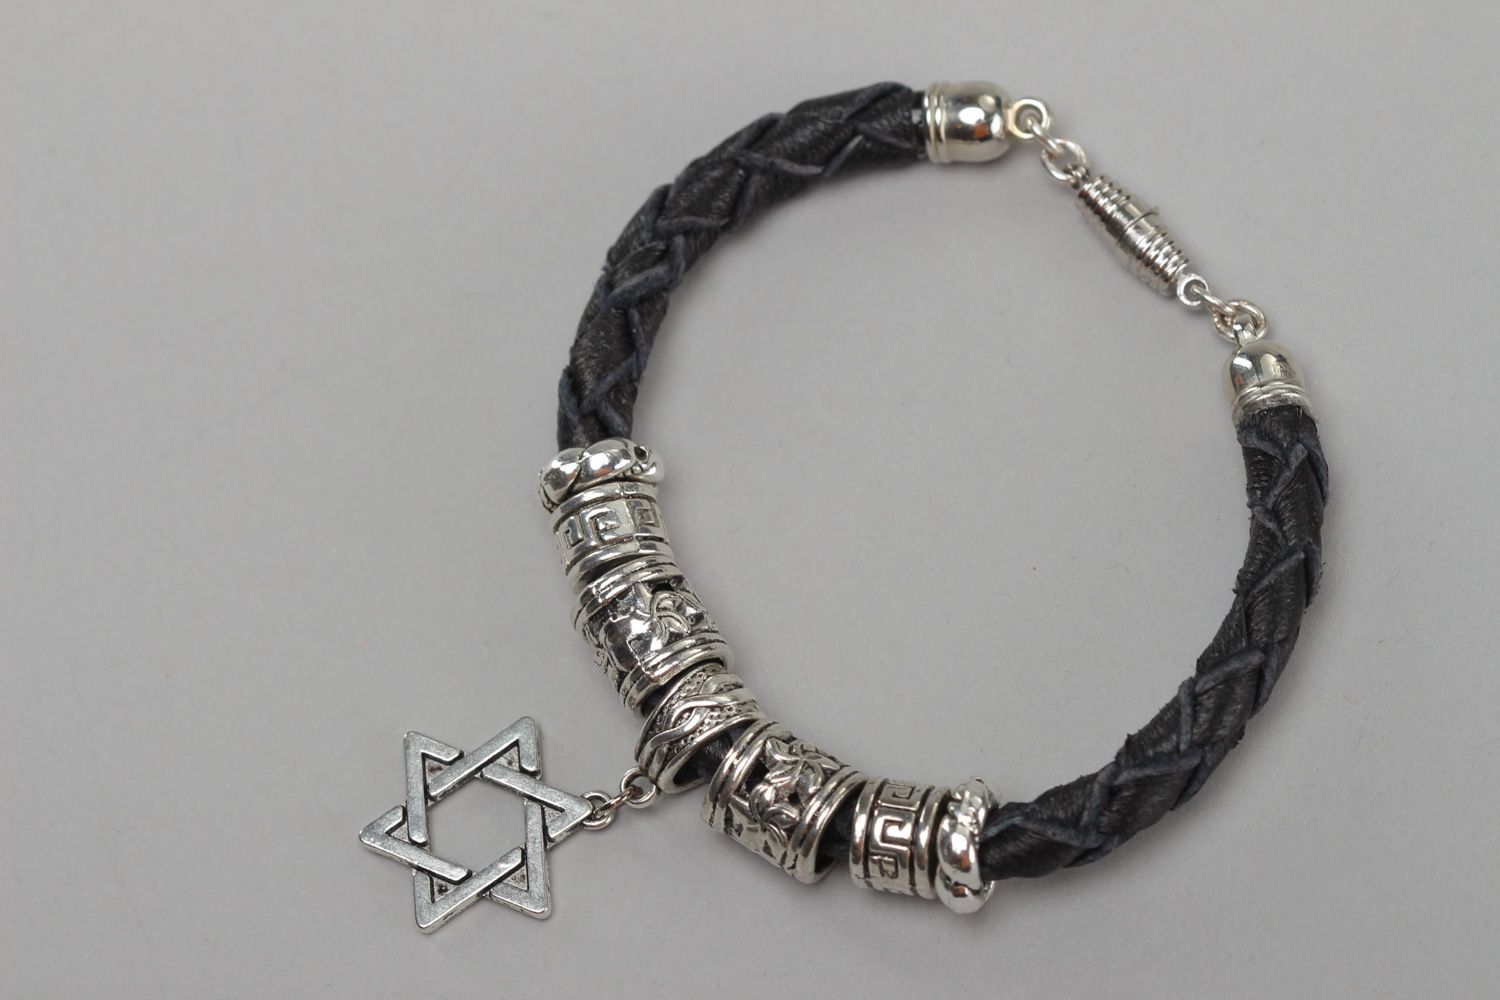 Handmade genuine leather bracelet with metal charm in the shape of David's star photo 2